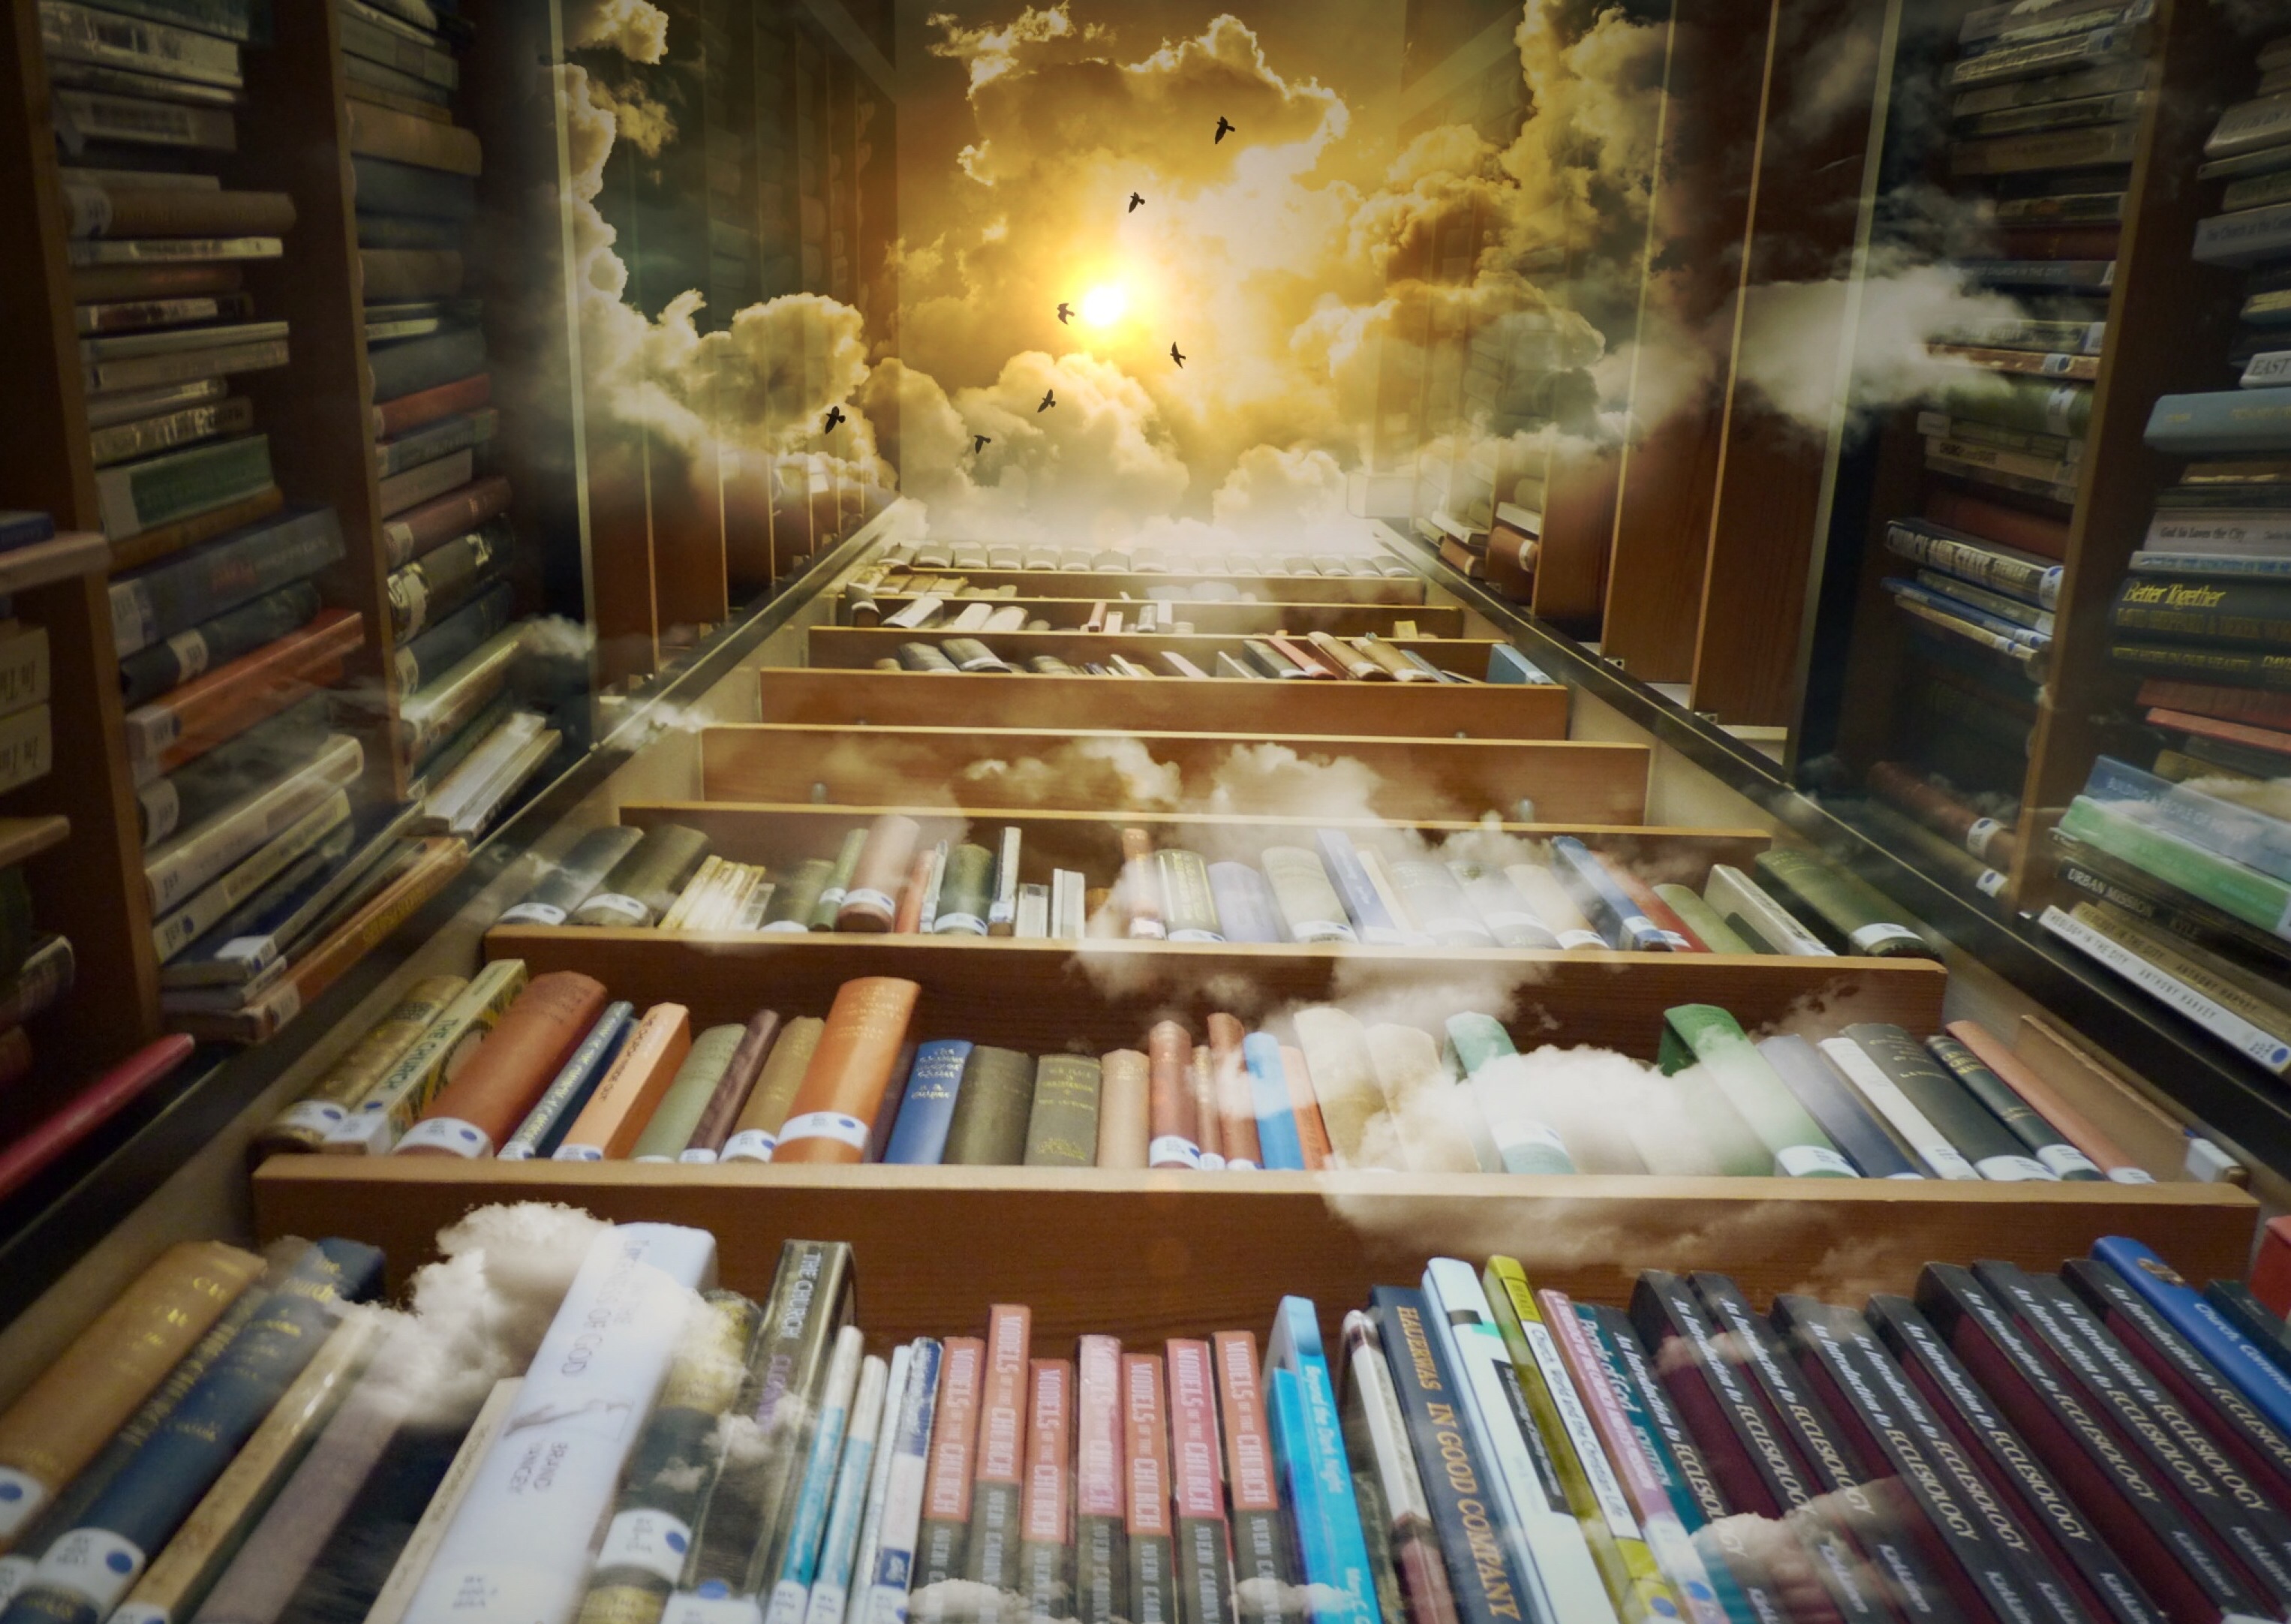 android shelves, miscellanea, books, clouds, miscellaneous, flight, photoshop, reading, library